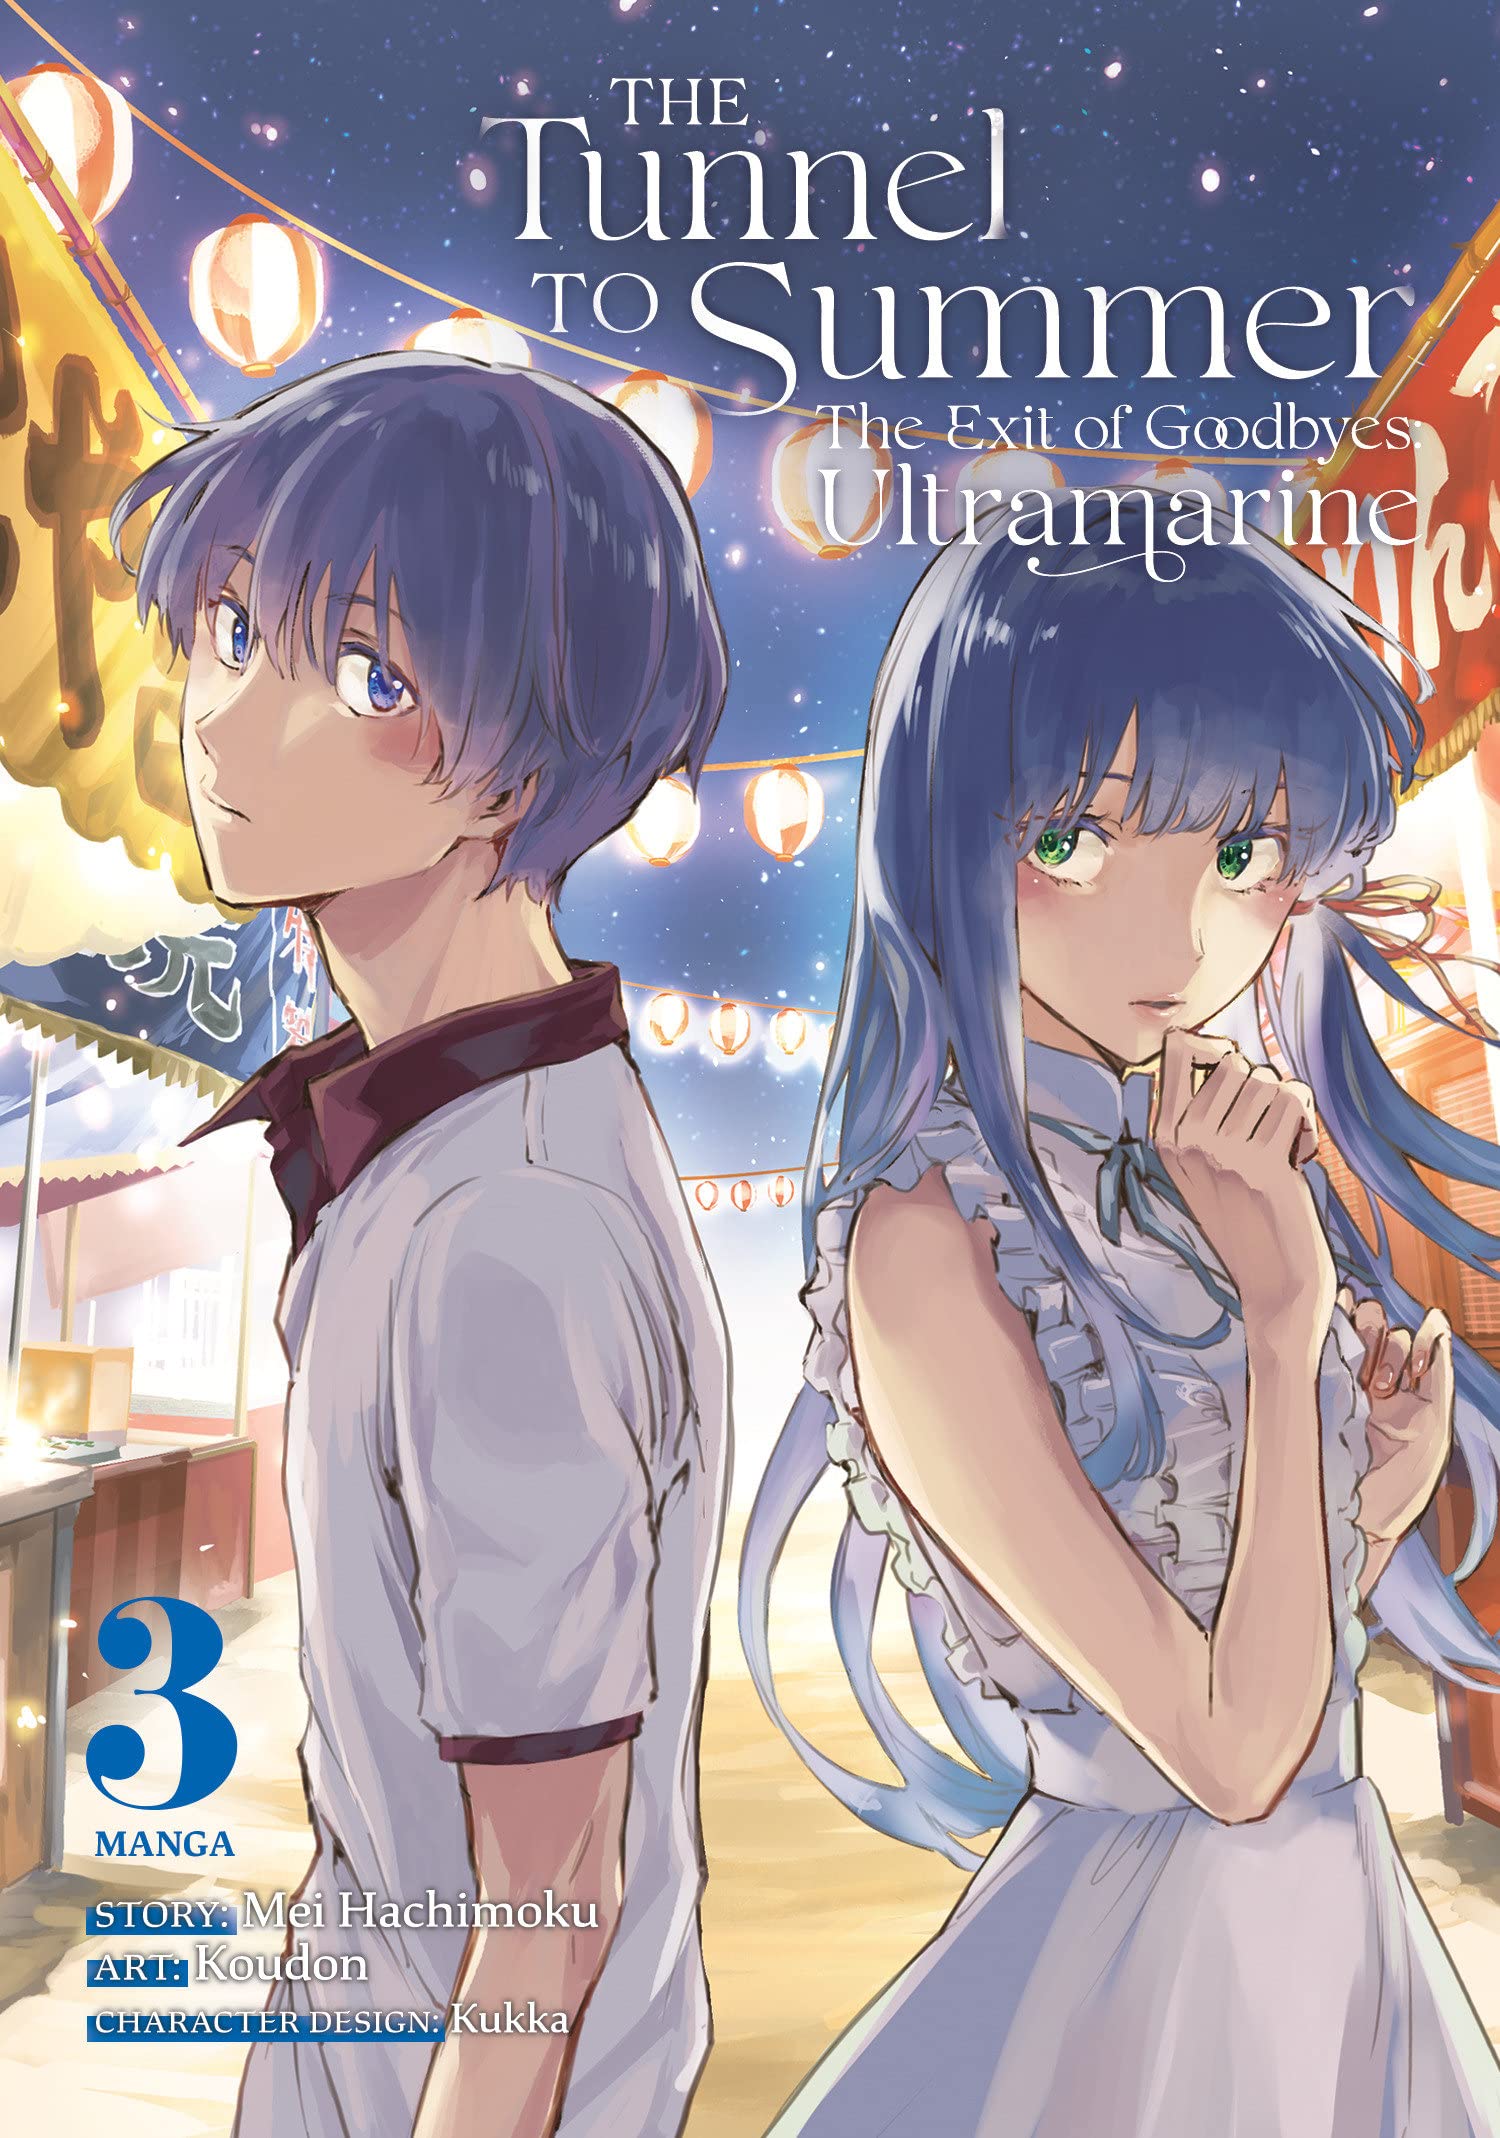 The Tunnel to Summer, the Exit of Goodbyes: Ultramarine (Manga) Vol. 03